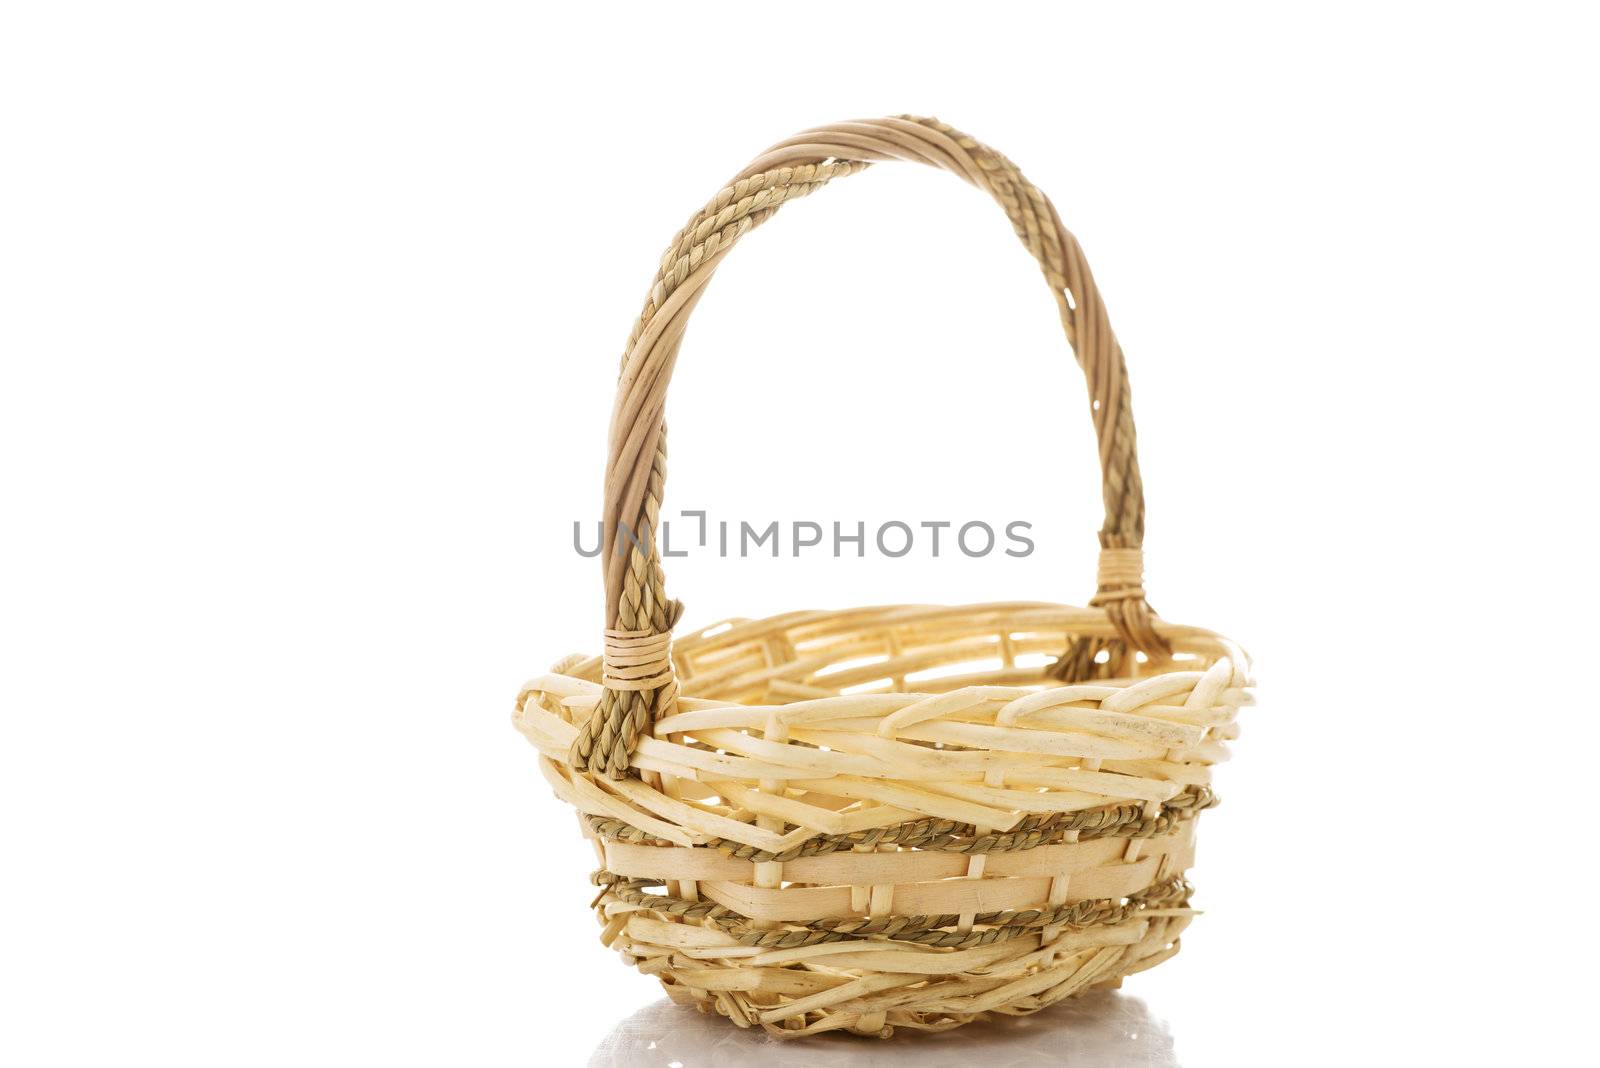 Wicker basket isolated on white